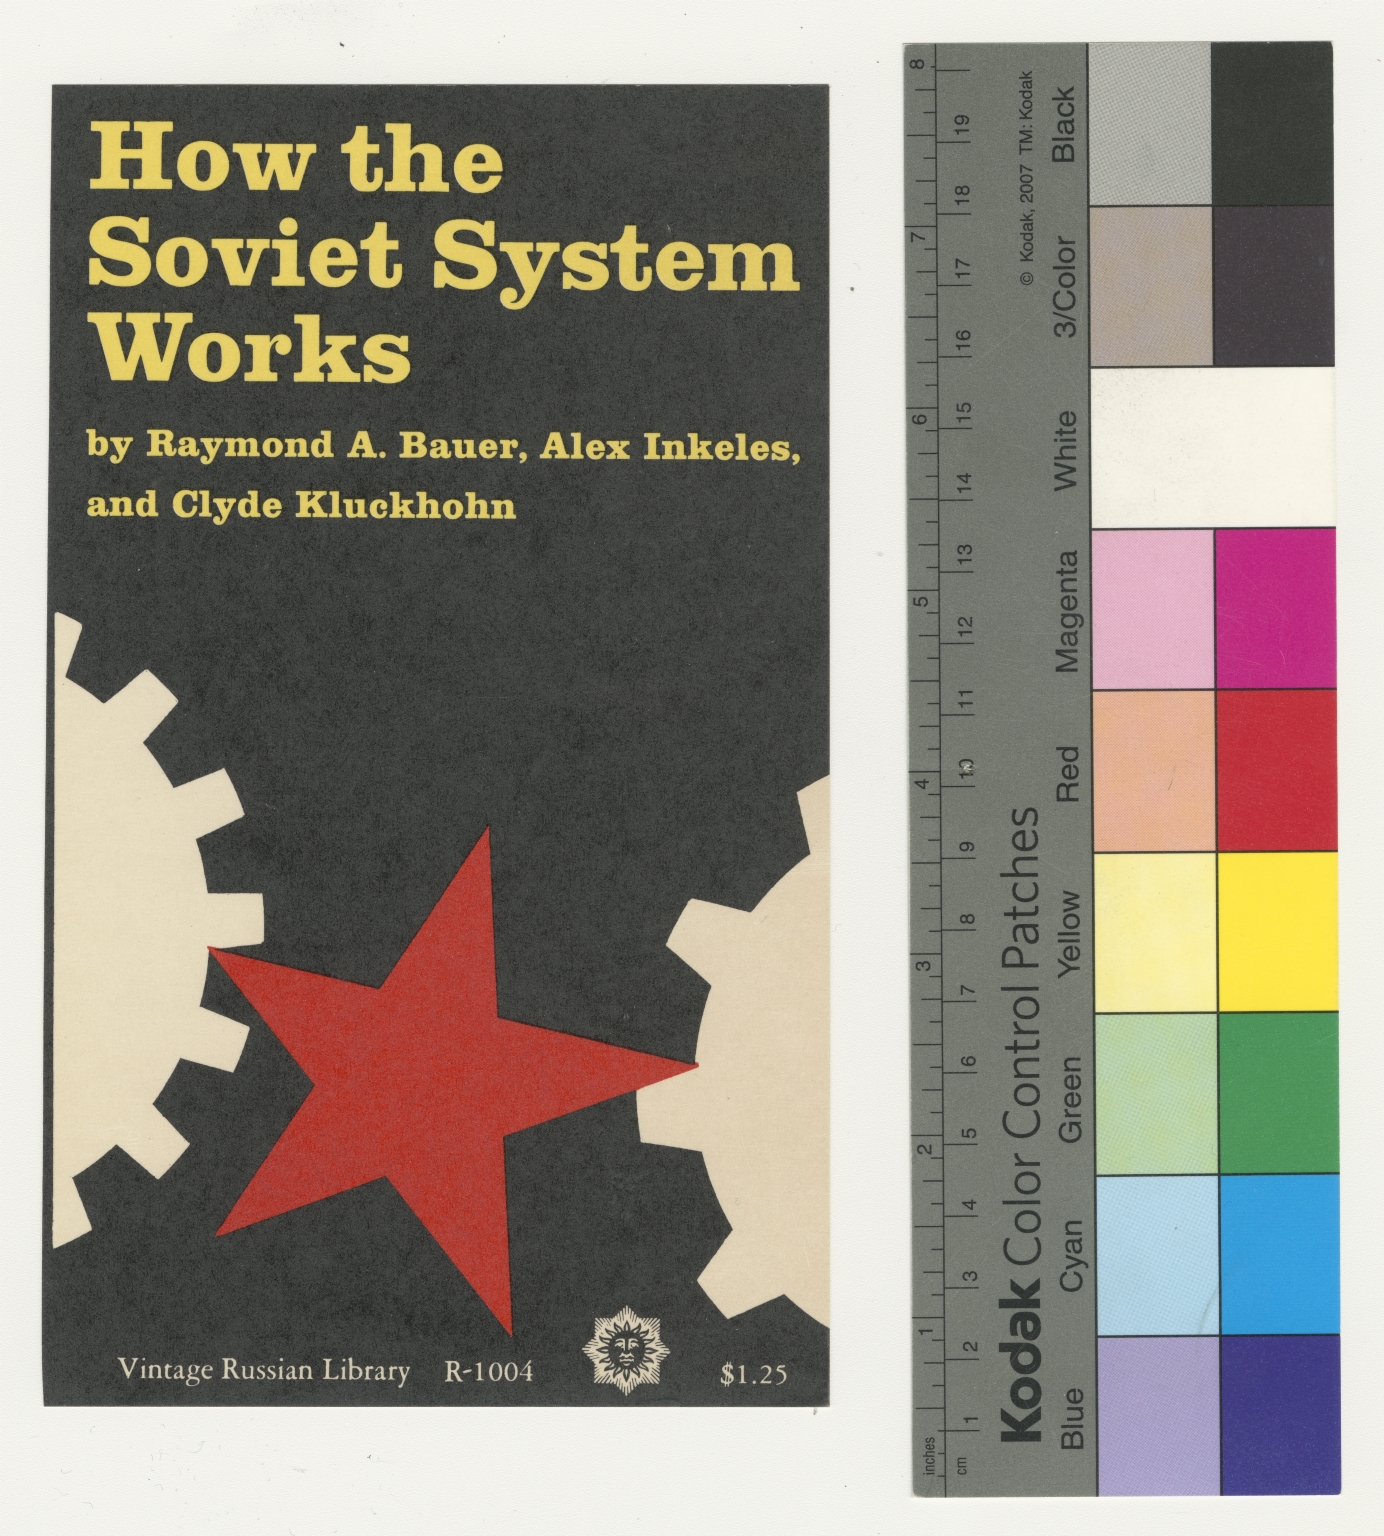 How the Soviet System Works